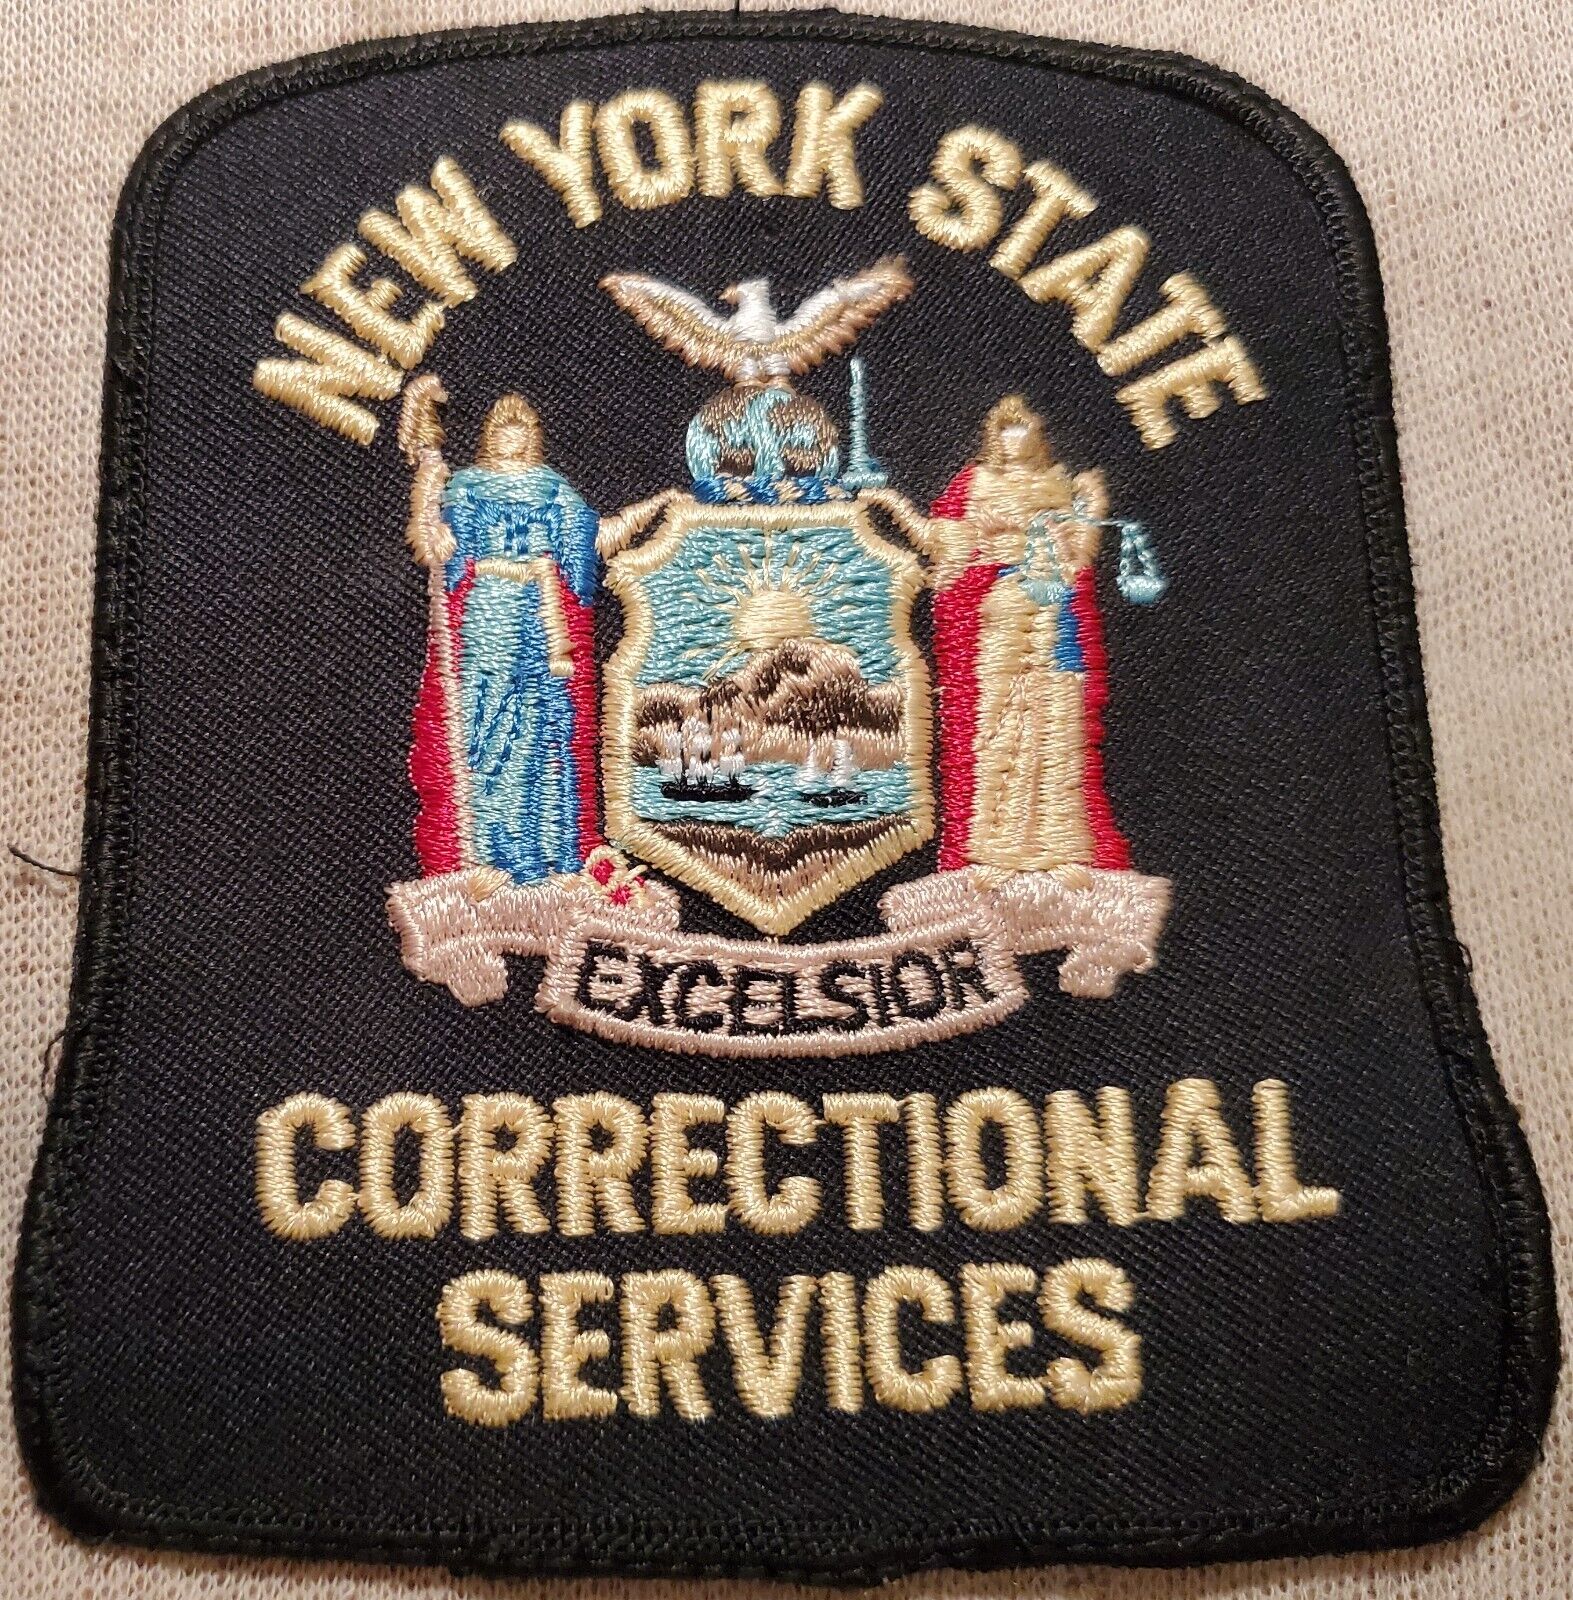 NY New York State Correctional Services Shoulder Patch